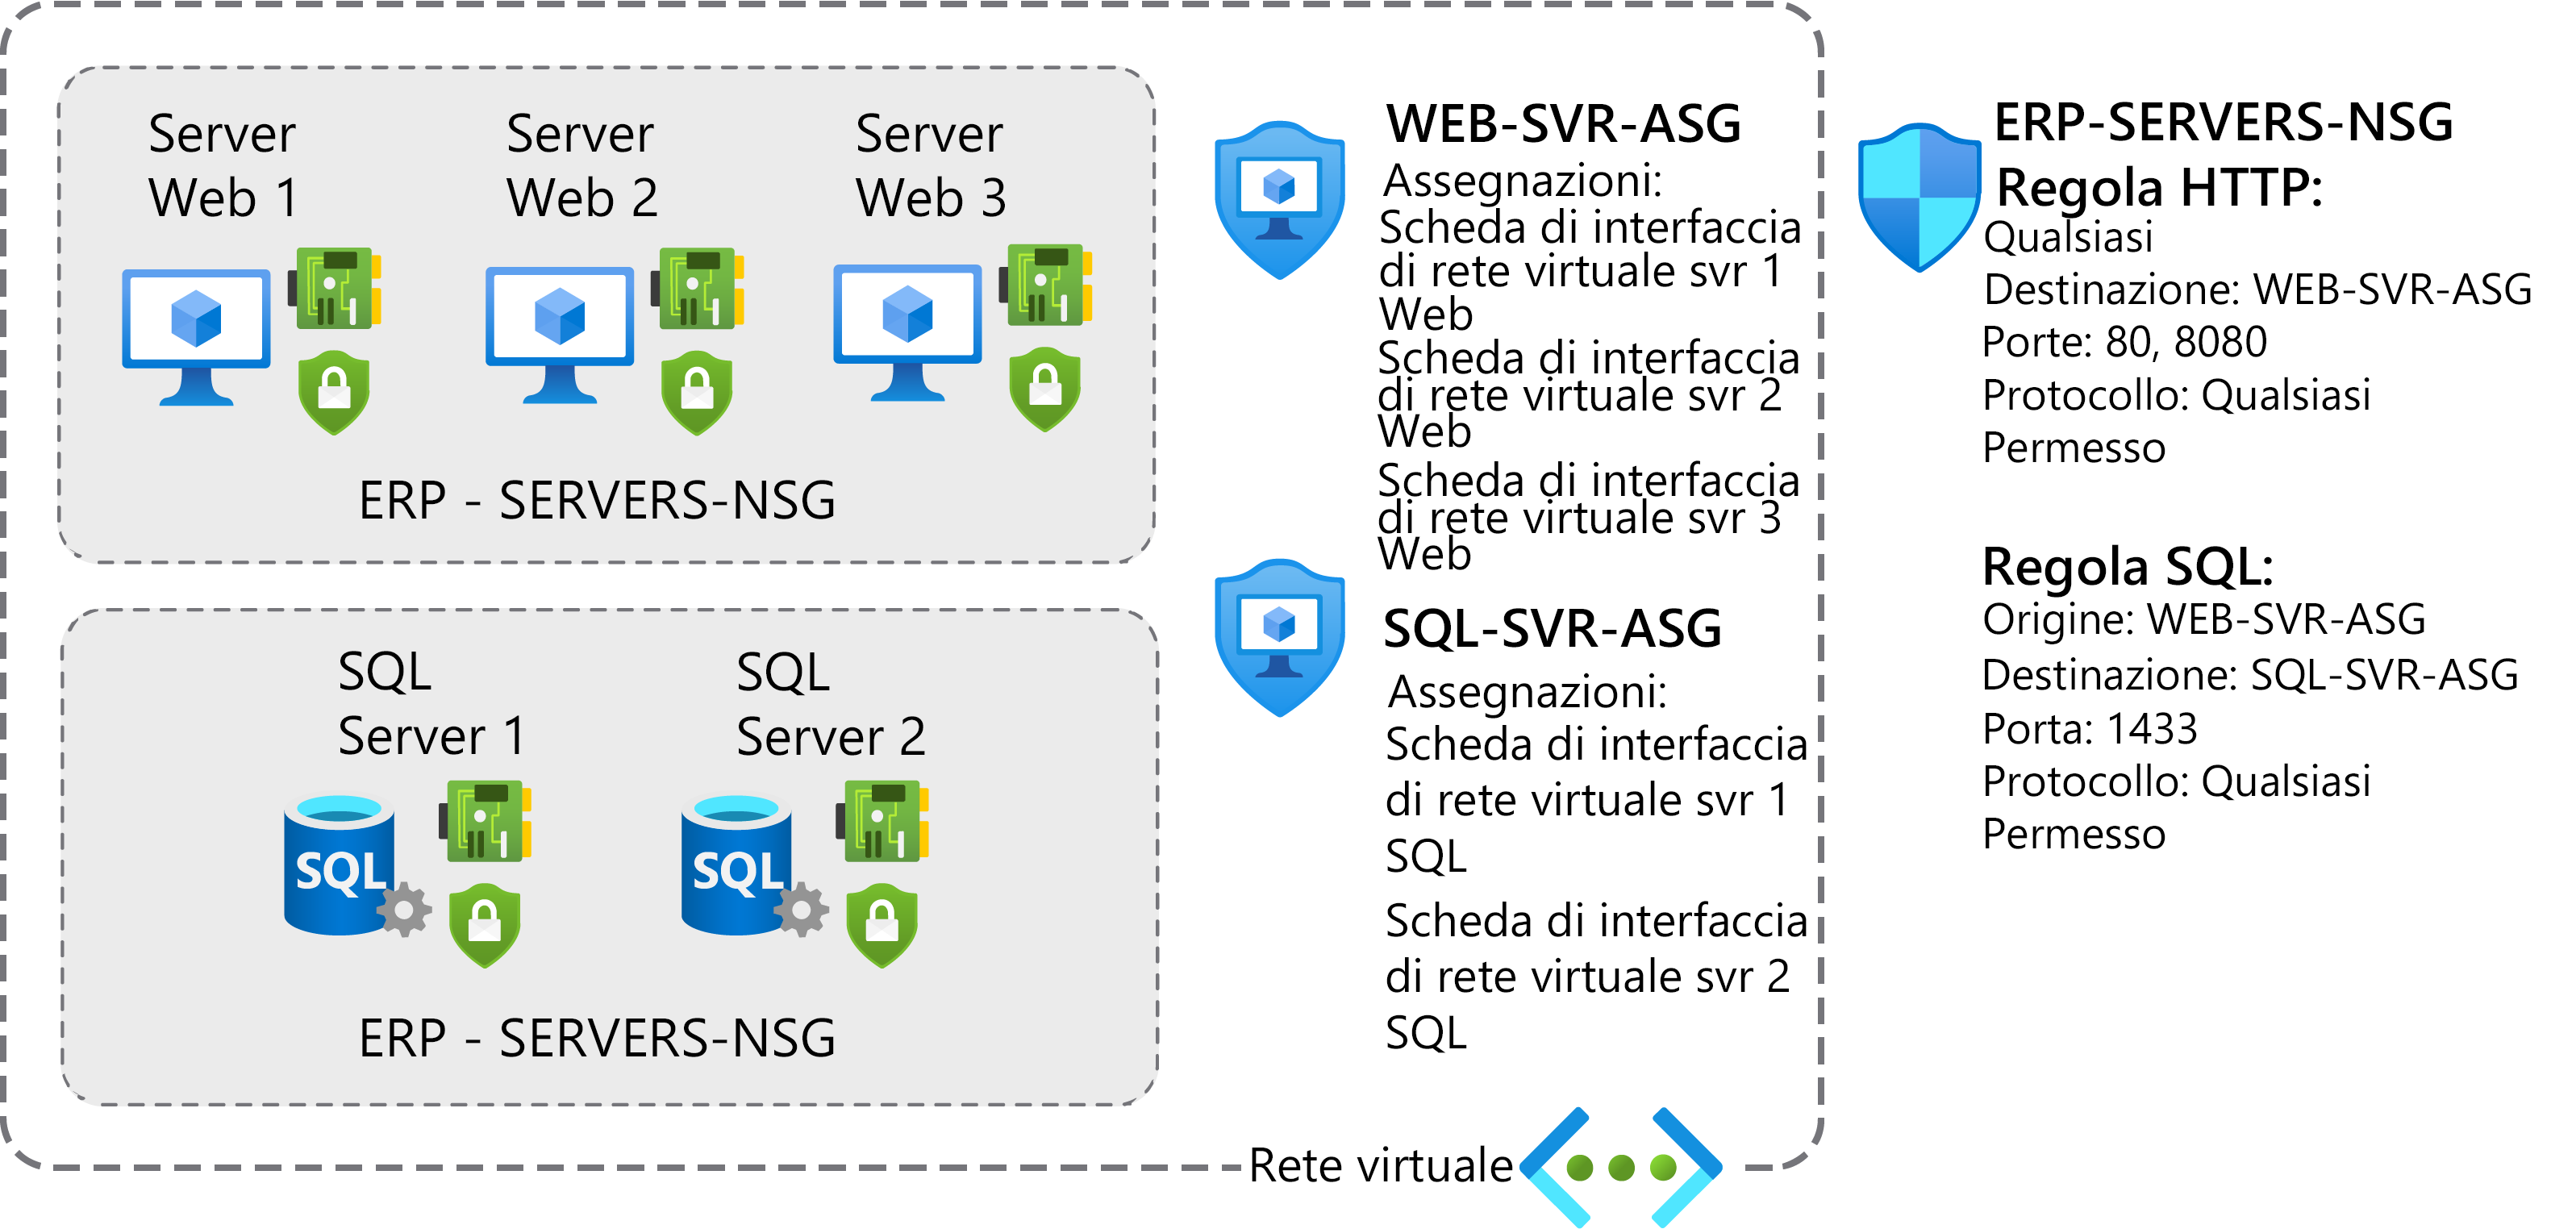 The graphic depicts a collection of web servers is protected by an NSG called ERP - SERVERS-NSG, as is a collection of SQL servers. This NSG has two rules: one which filters web traffic to port 80 and 8080, and a second that filters SQL traffic on port 1433. The web servers are protected by an ASG called WEB-SVR-ASG assigned to their NICs. The SQL servers are protected by an ASG called SQL-SVR-ASG which is assigned to their NICs. All resources are connected to the same VNet.